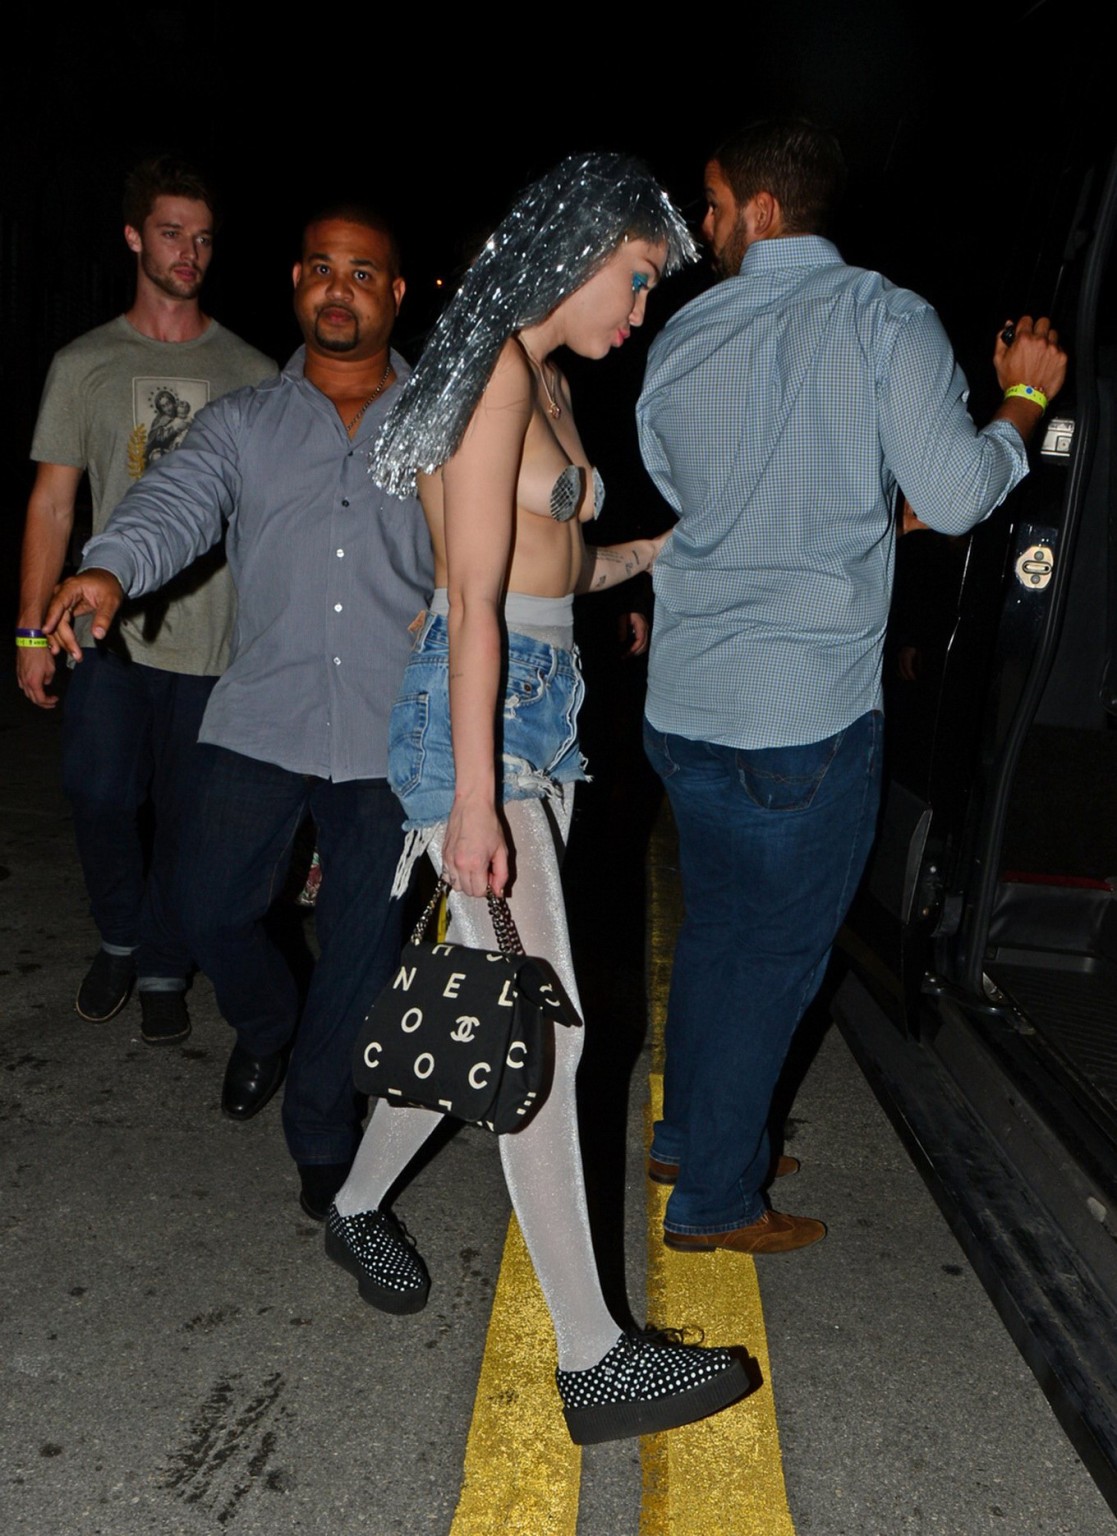 Miley Cyrus topless but wearing pasties and pantyhose at Art Basel in Miami #75179262